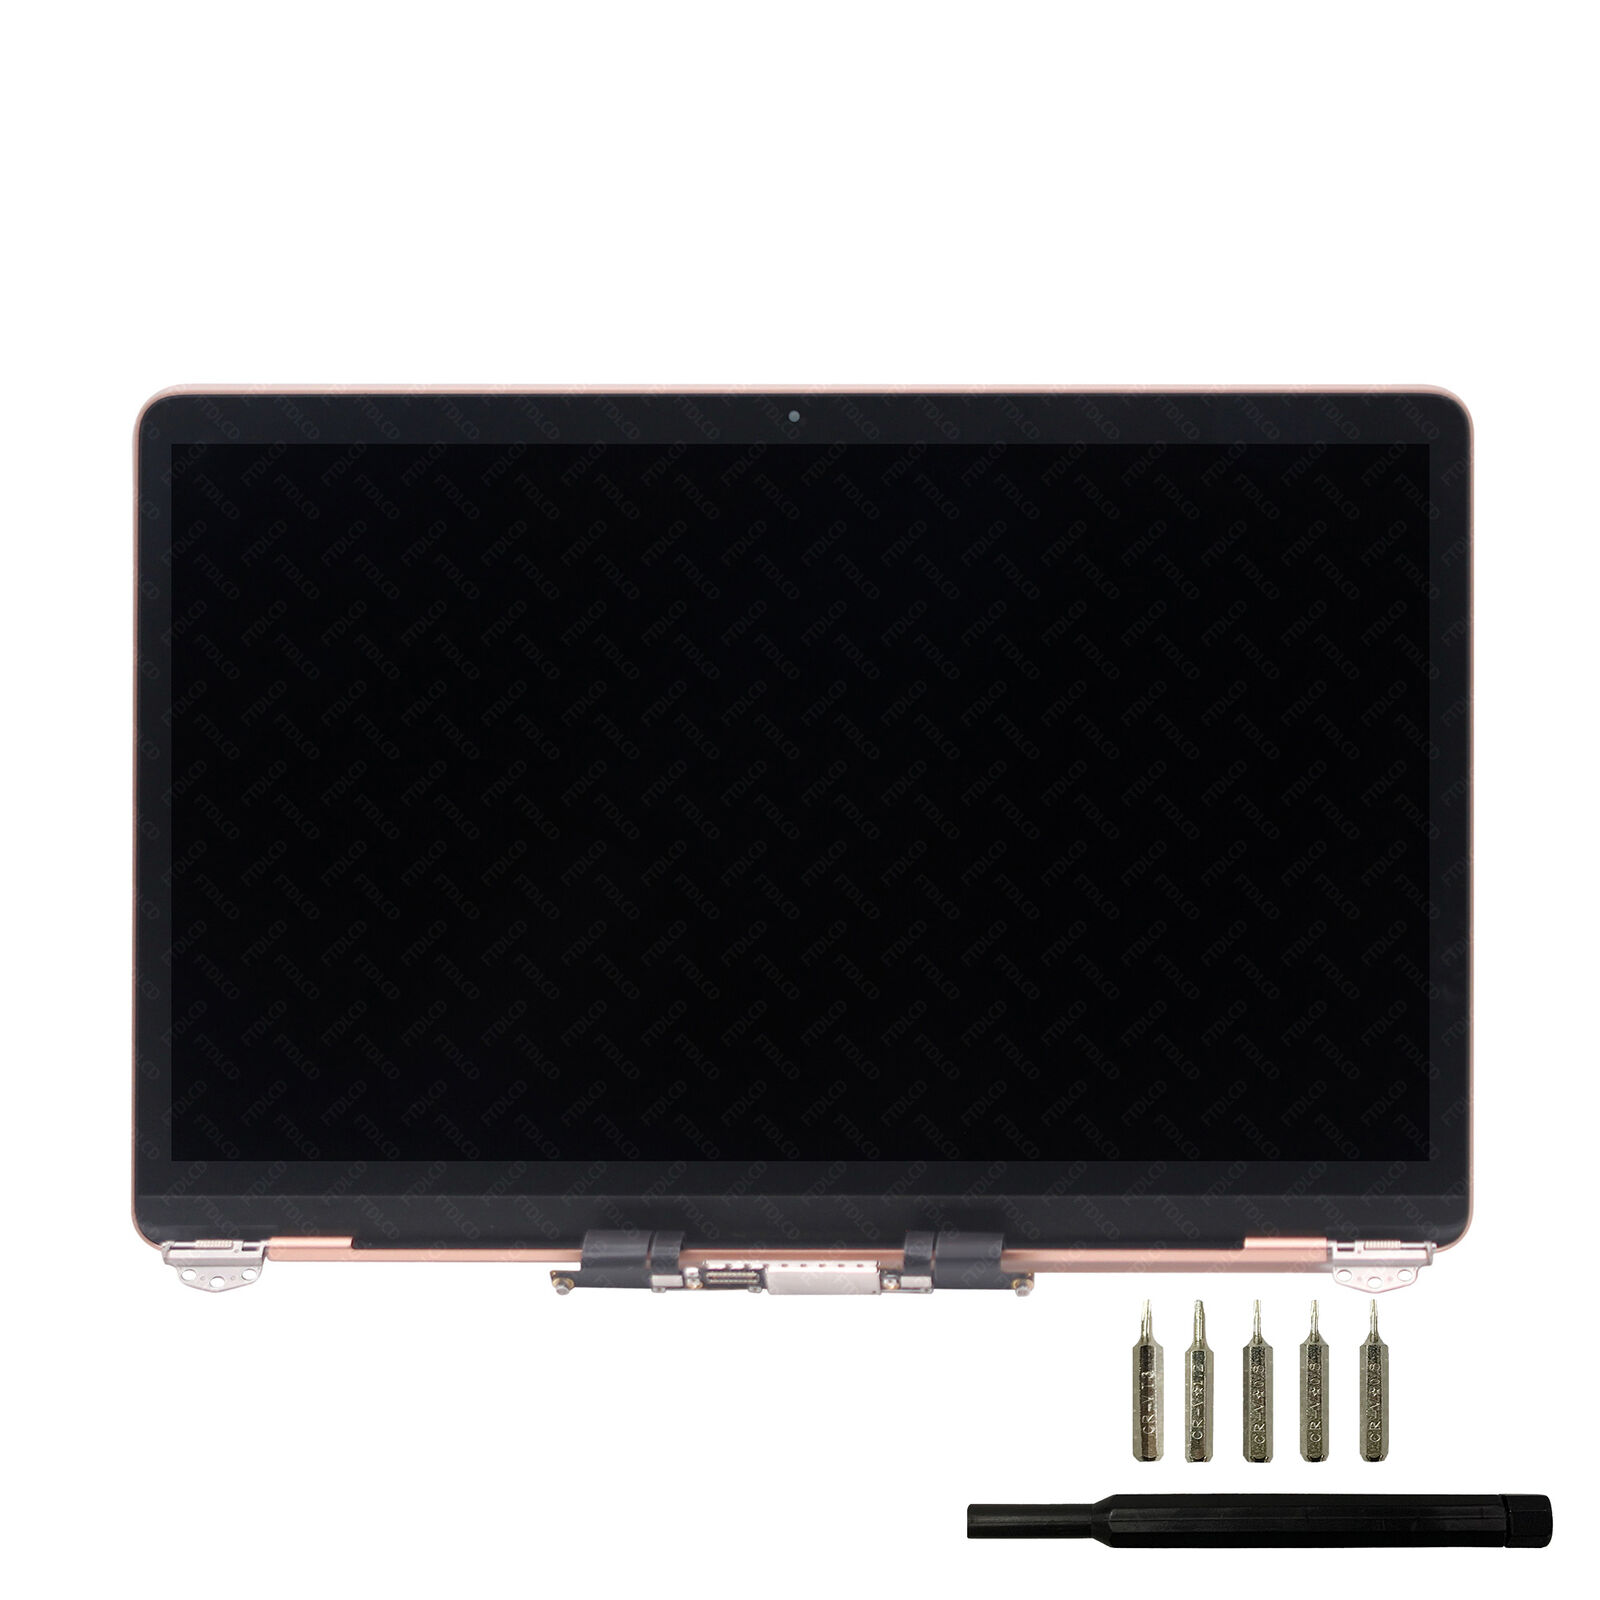 New For MacBook Air 13‘’ A1932 EMC 3184 Display Laptop Screen Assembly Rose Gold